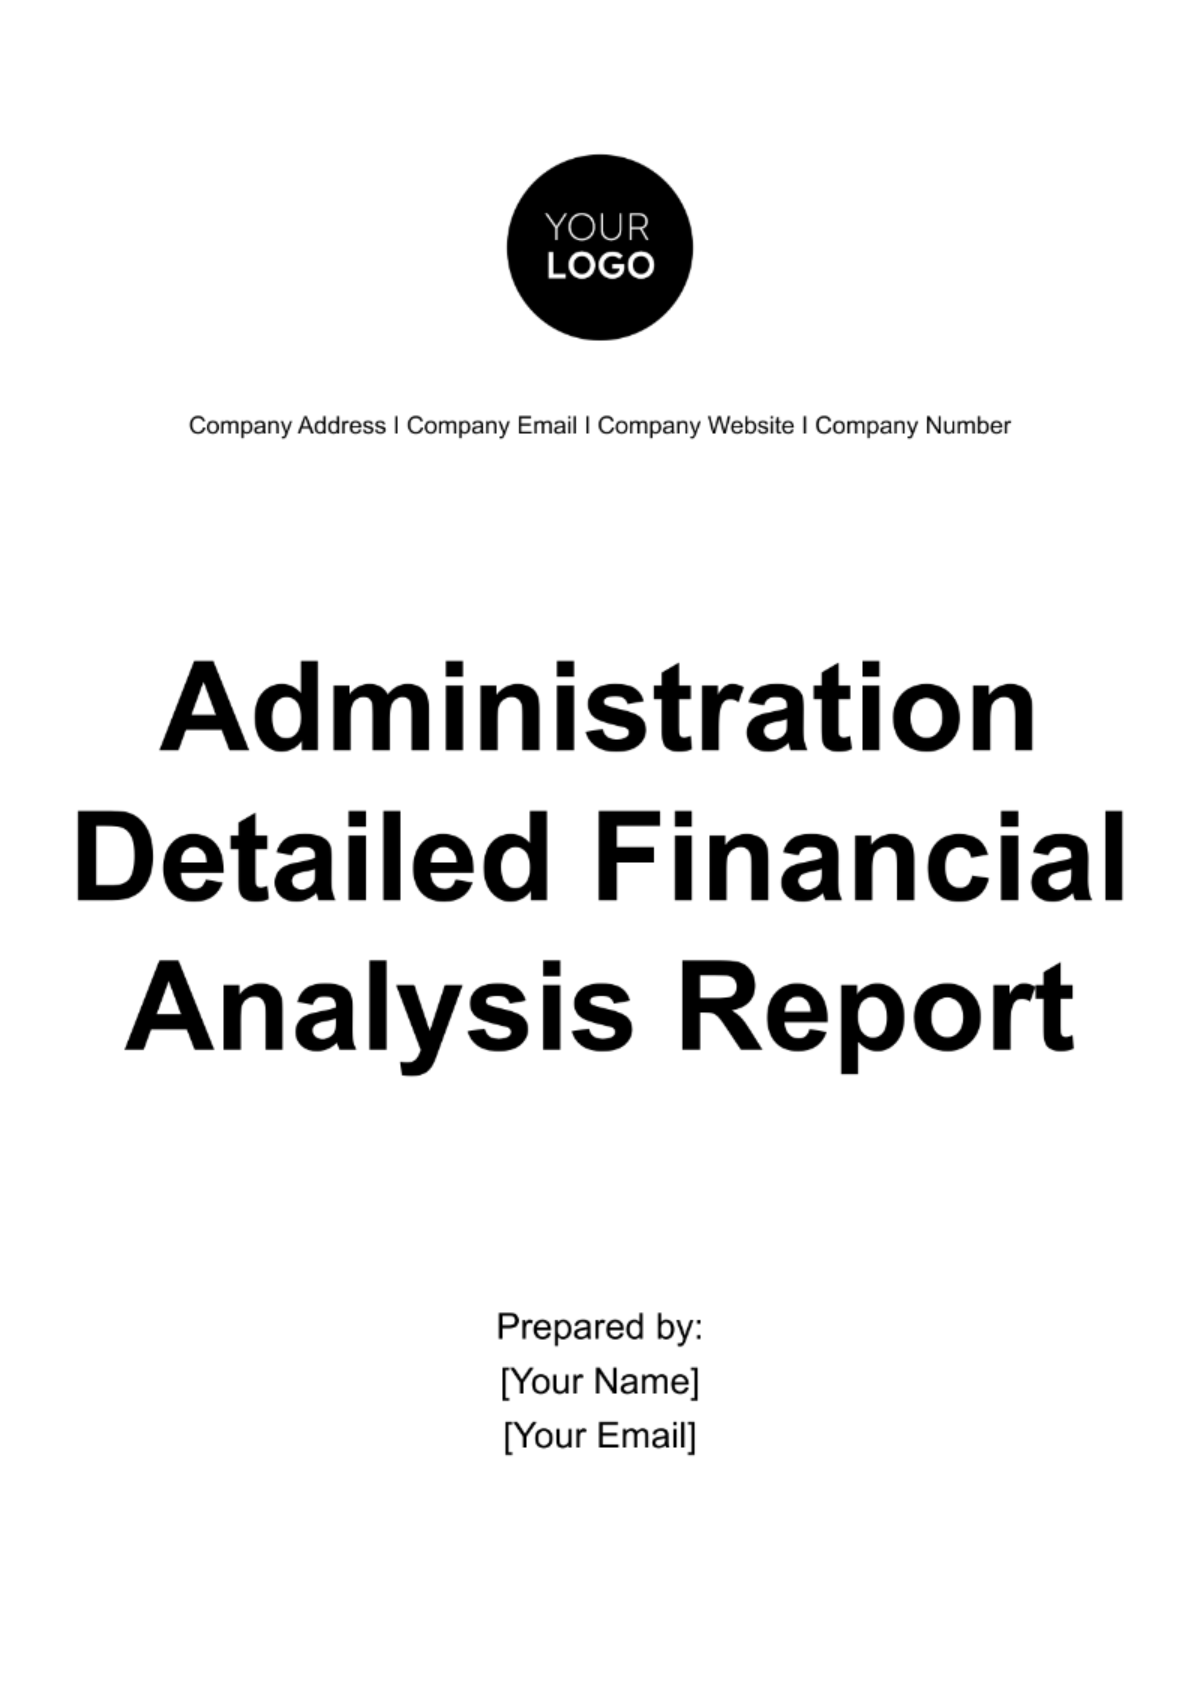 Administration Detailed Financial Analysis Report Template